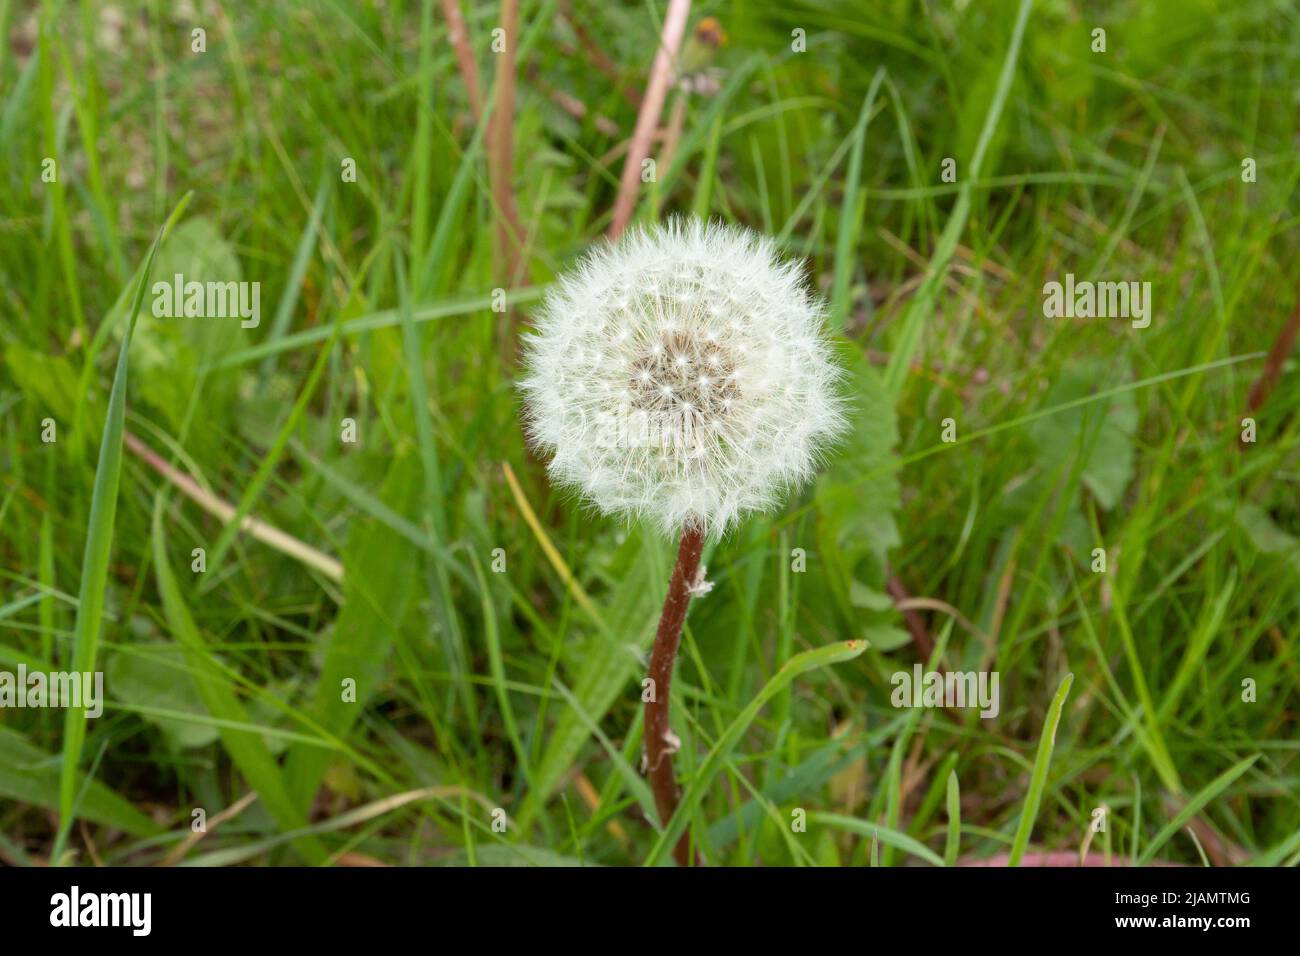 Close up white seed bulb of Dandelion, Taraxacum officinale, with seeds on fluff for wind dispersal against green botanical herbal background Stock Photo